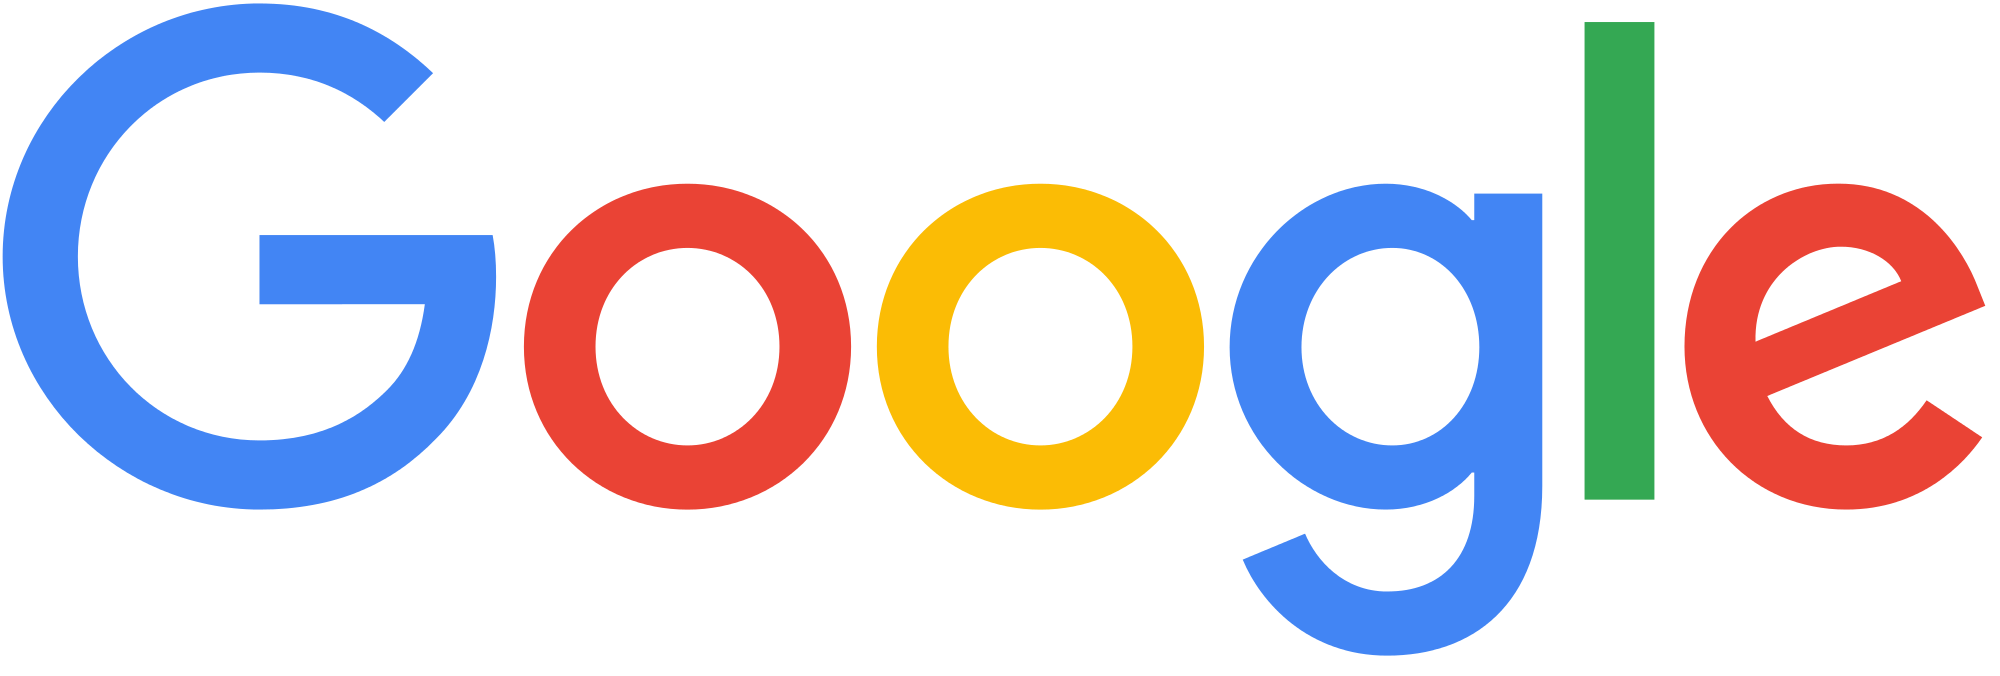 An image of the current logo for the Google search engine